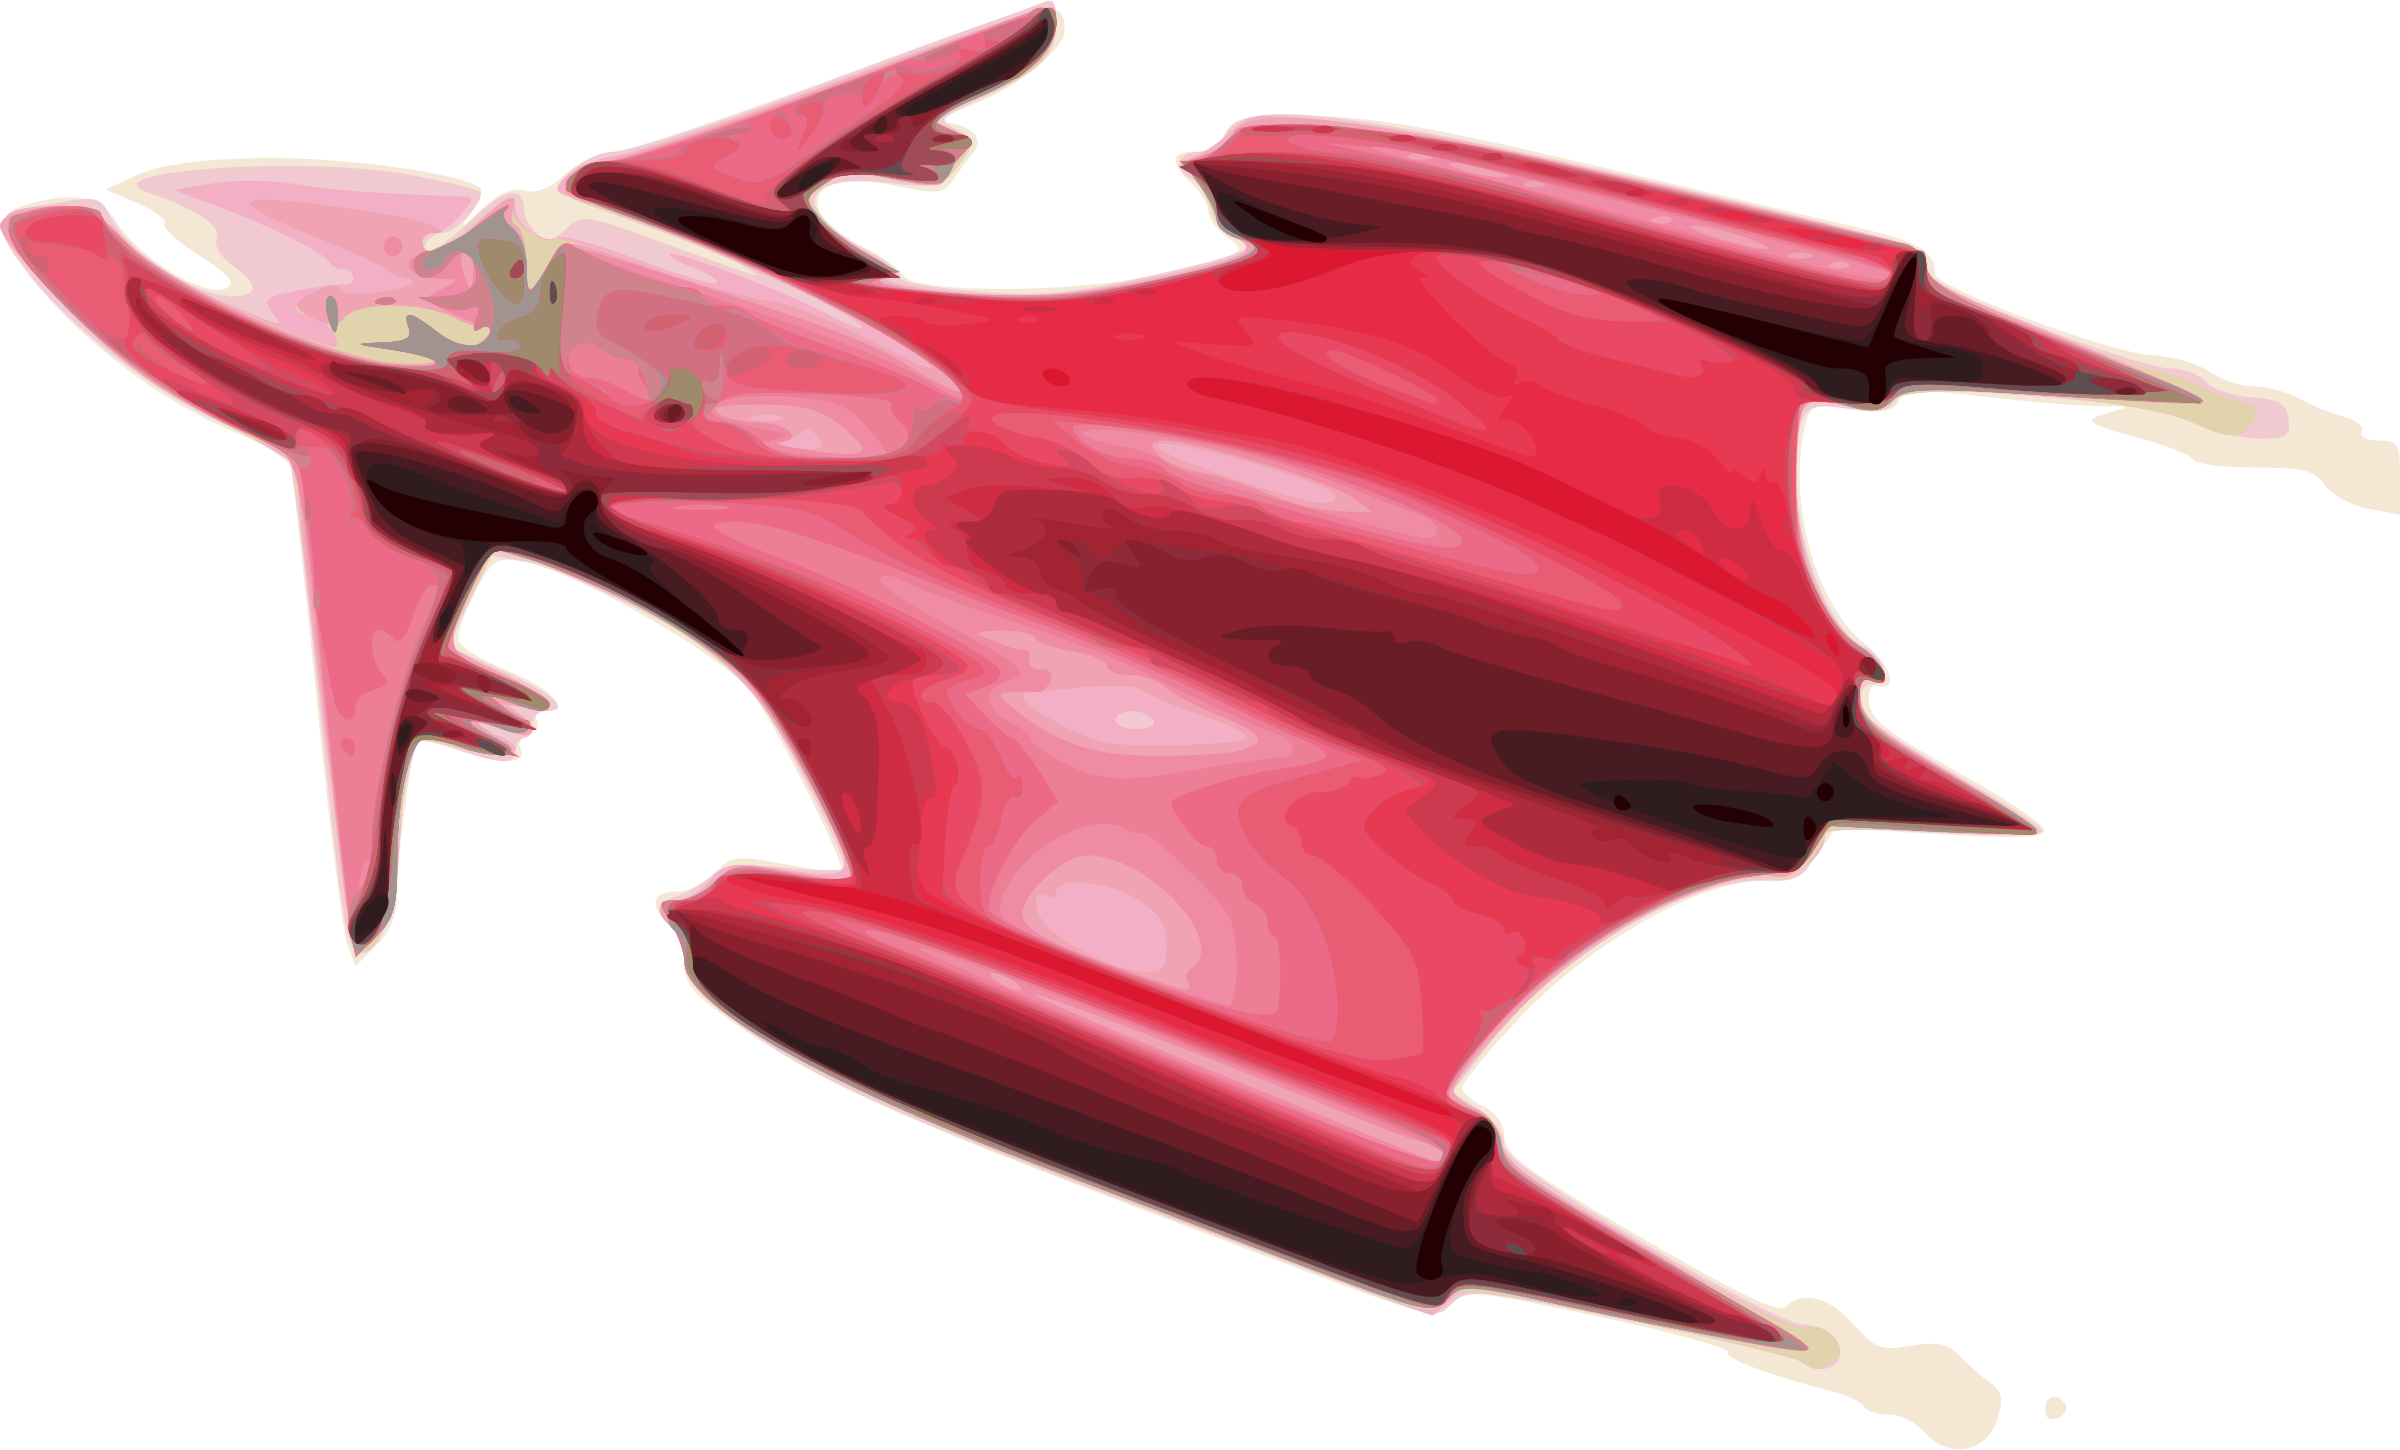 Red Spaceship Vector Clipart image